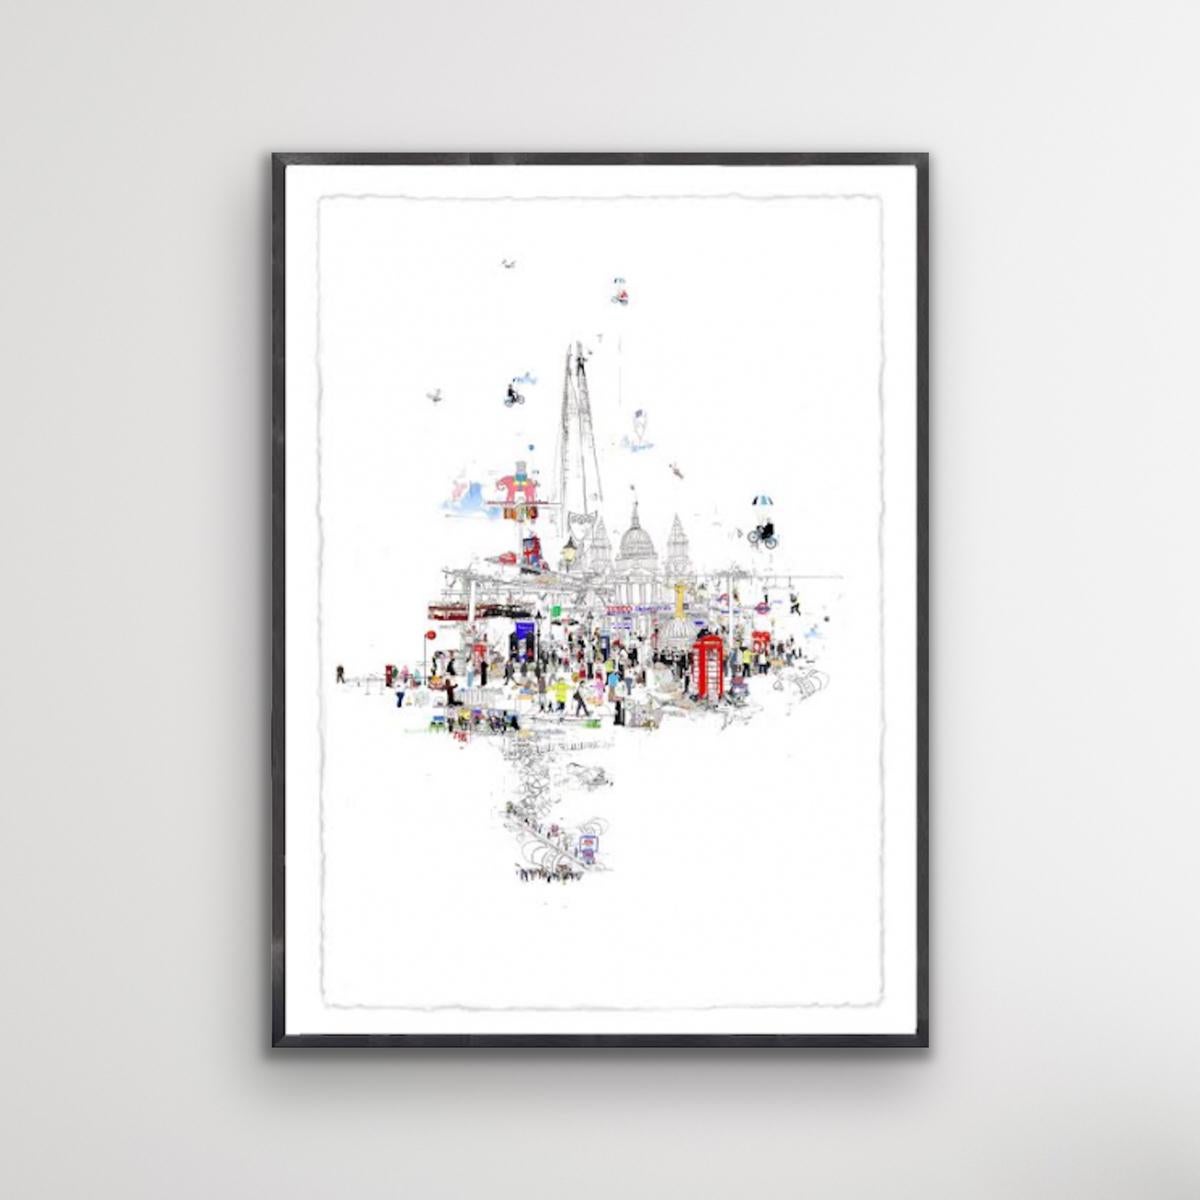 Crazy Town 2014 by Laura Jordan is a fun portrait of London. The work is a Limited Edition Print in an edition of 50. This artwork is printed on archival paper with a hand finished overlay of pencil watercolour and collage. The process in which